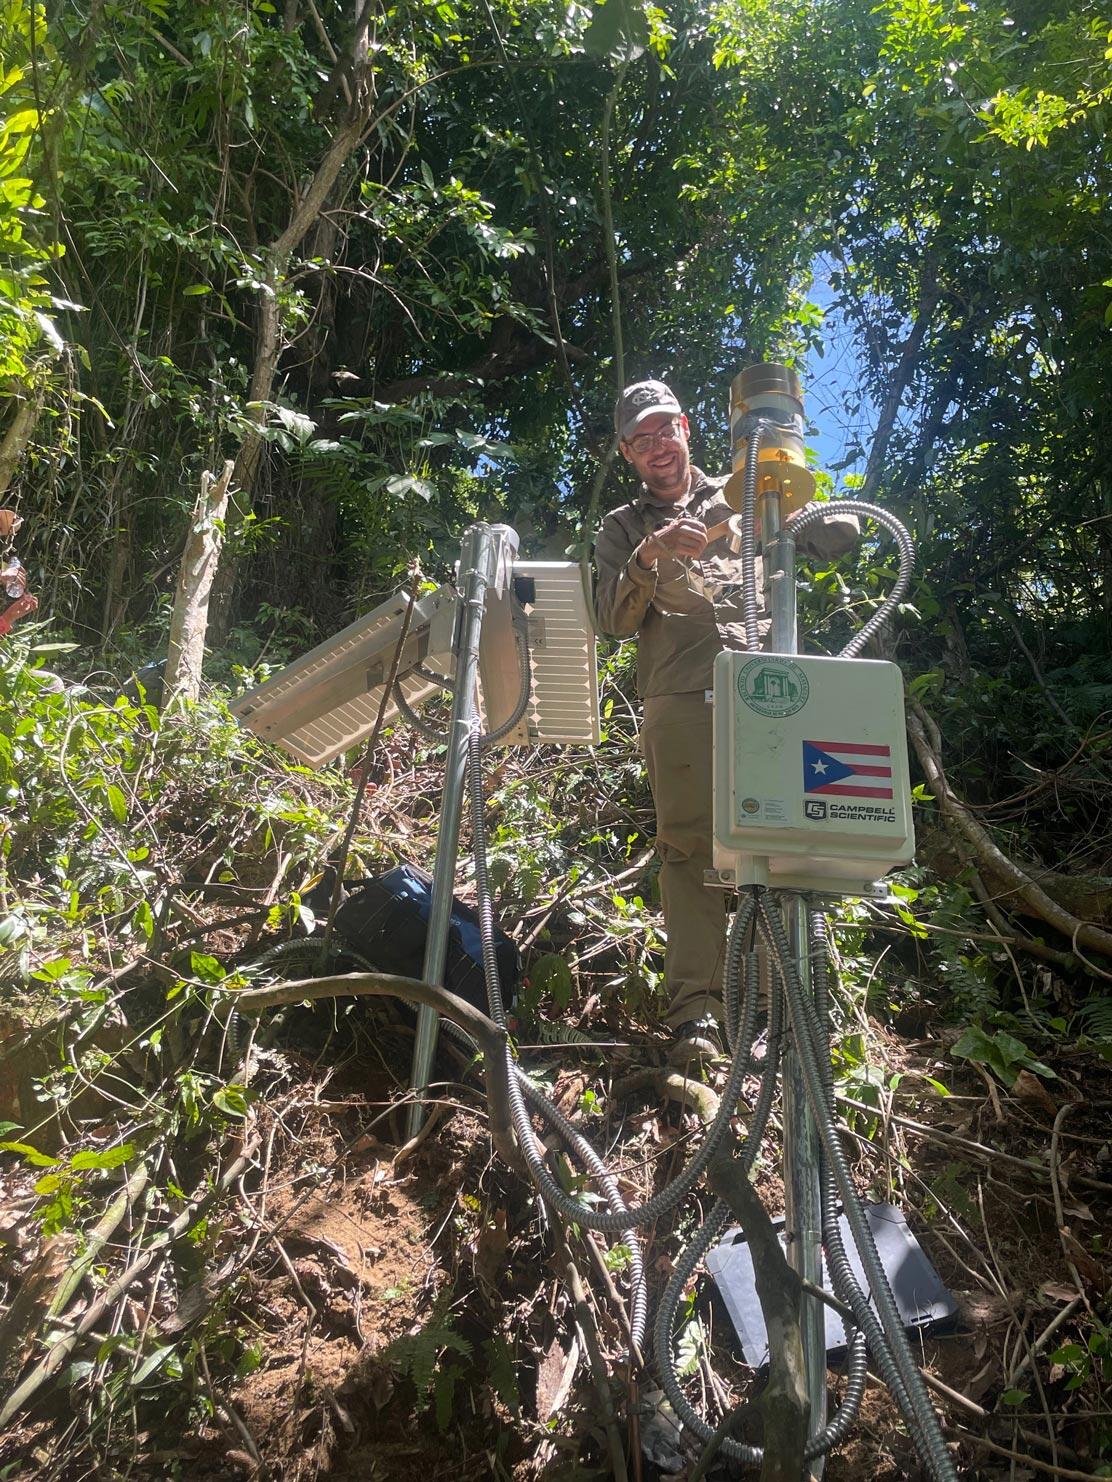 person working on landslide monitoring equipment